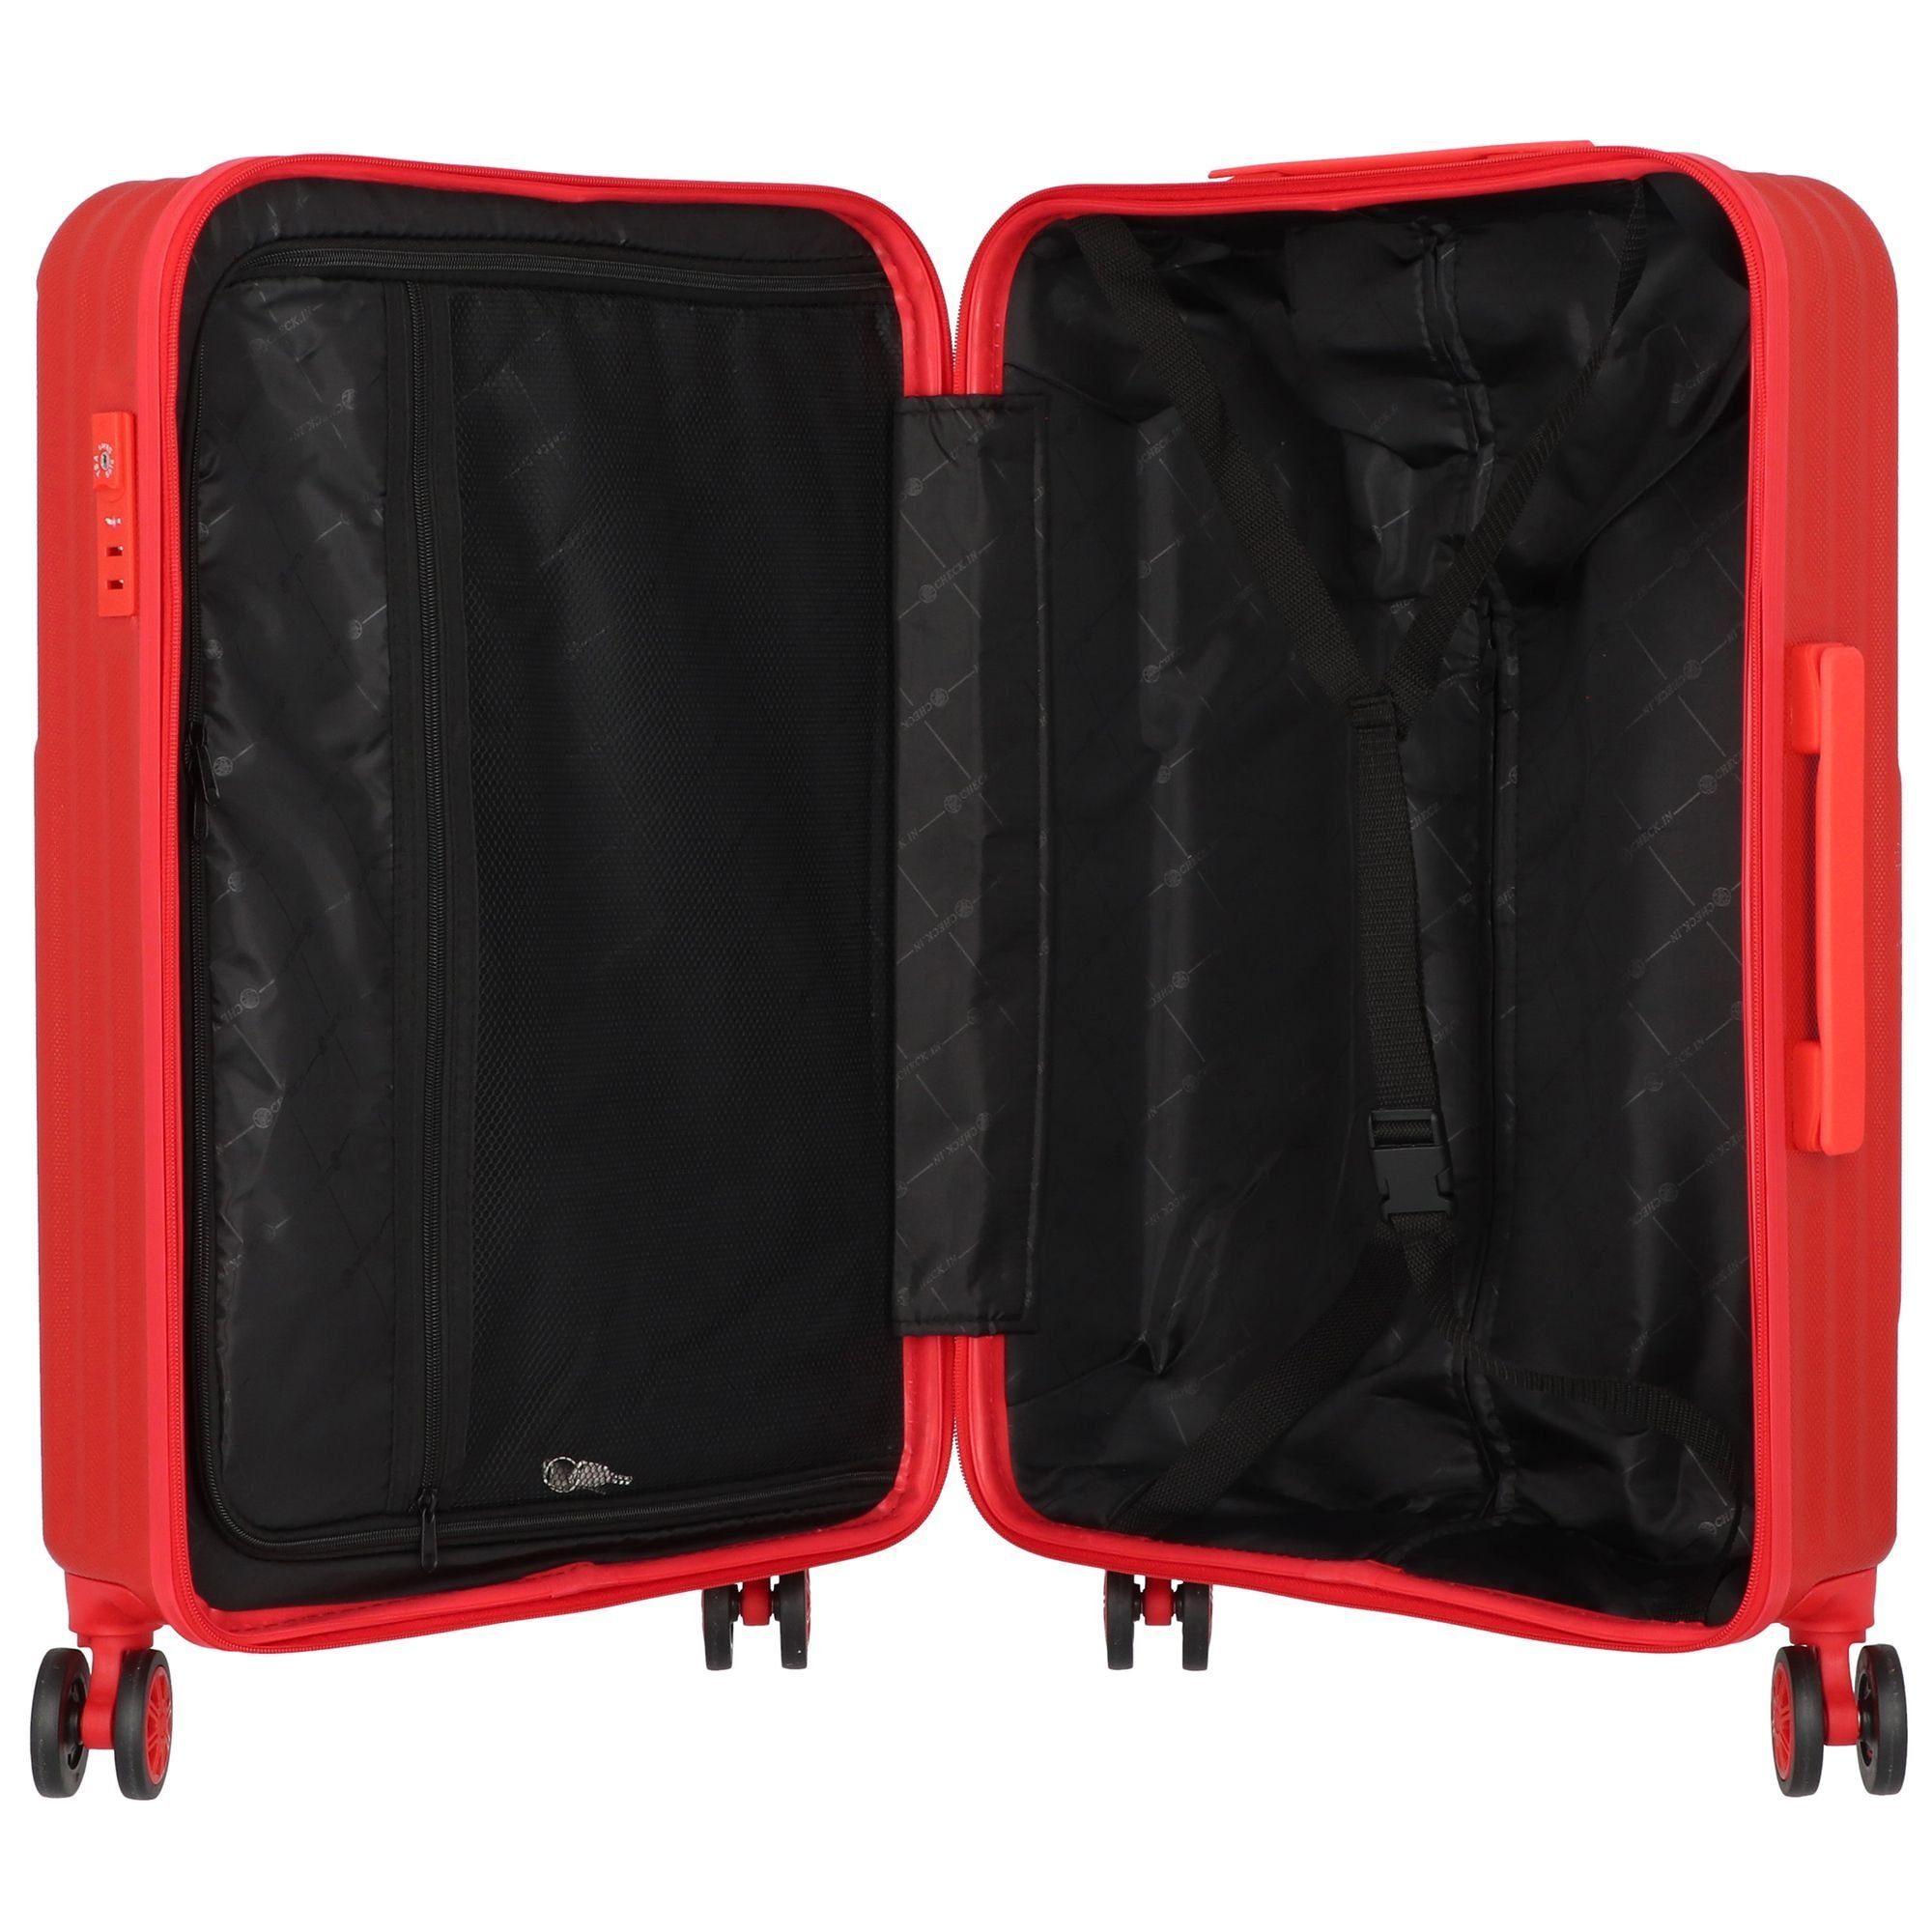 CHECK.IN® Trolleyset Liverpool, 4 3 Rollen, tlg), rot (3-teilig, ABS